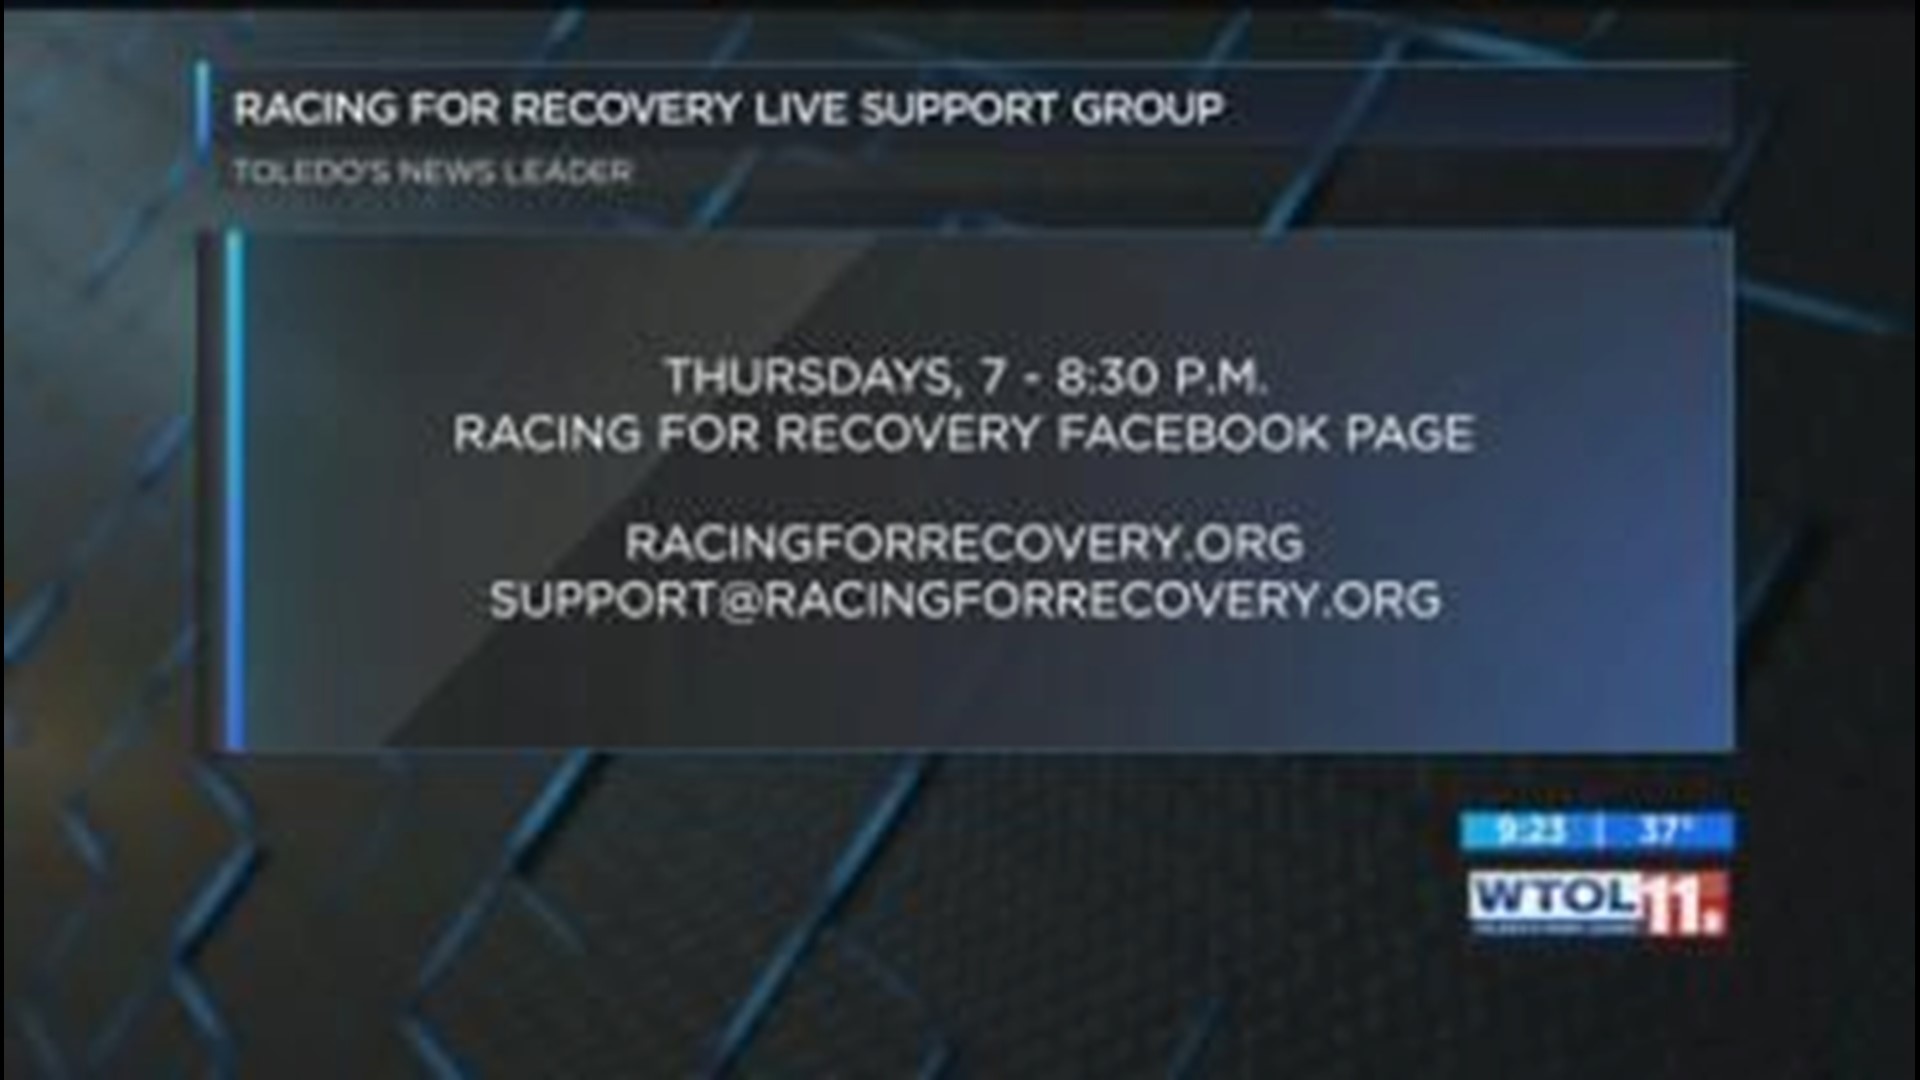 Racing for Recovery offers new chiropractic services